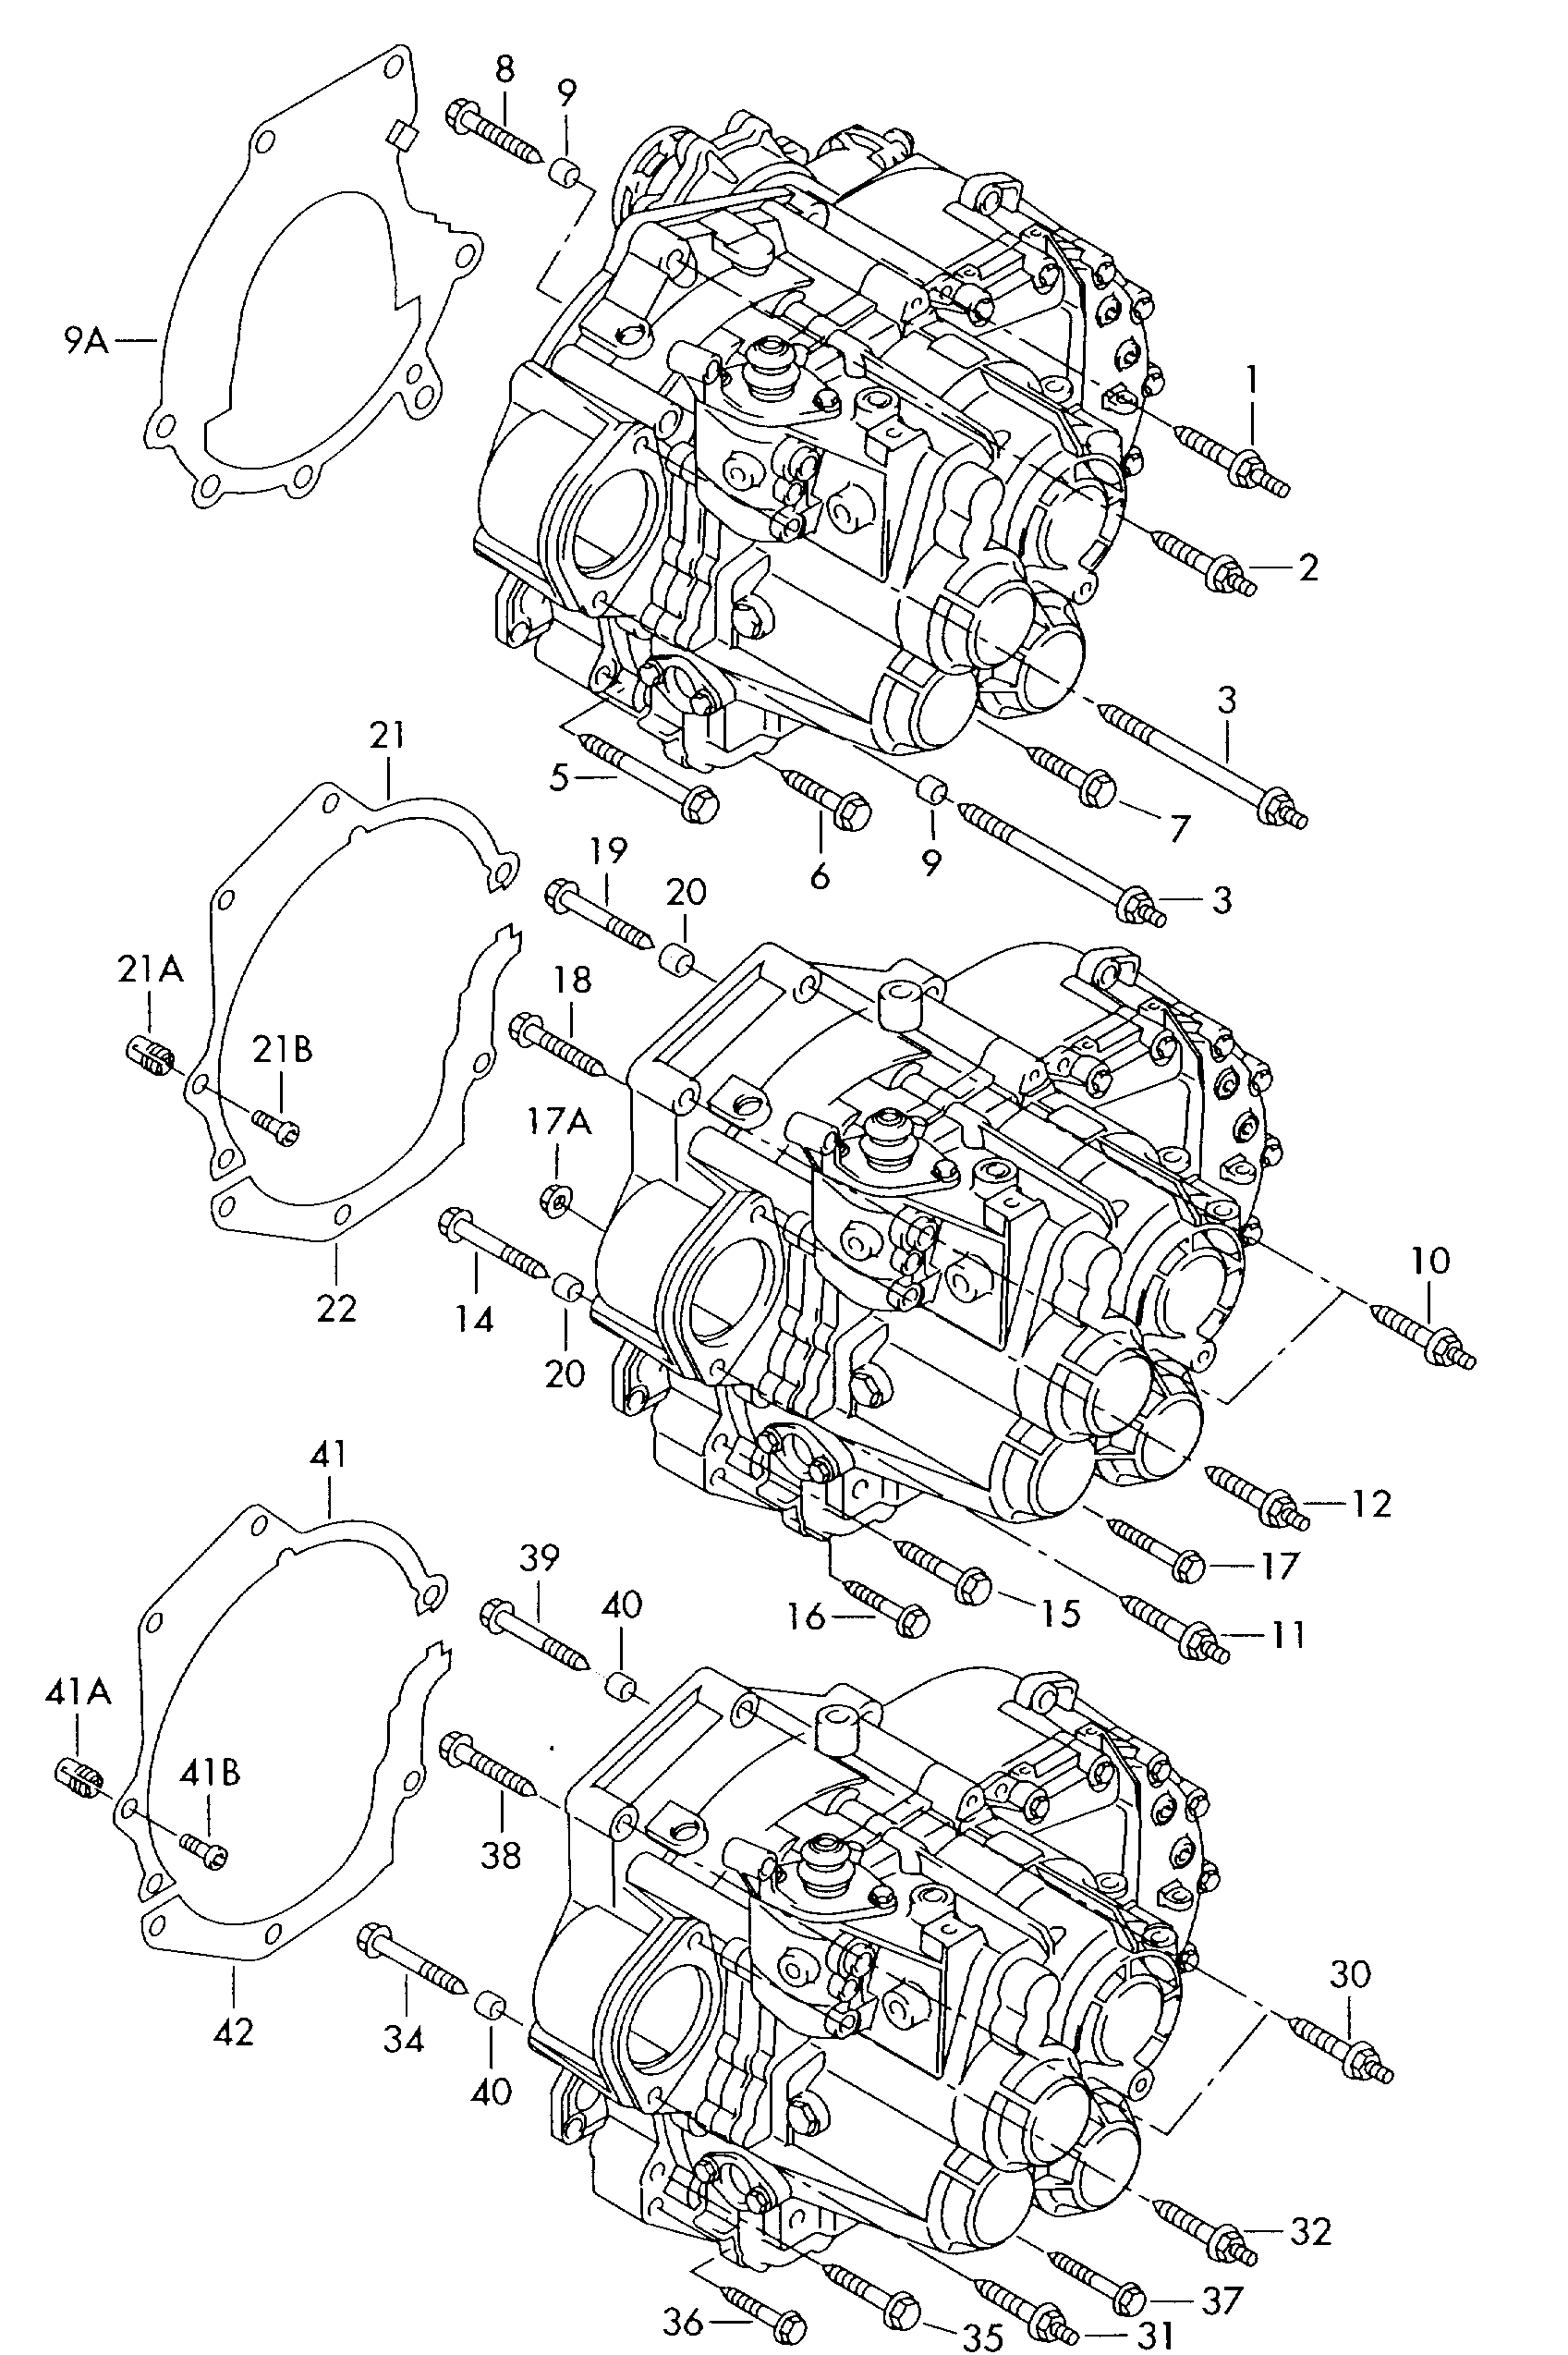 mounting parts for engine and<br>transmission6-speed manual transmissionfor four-wheel drive 4 cylinder - Octavia - oct